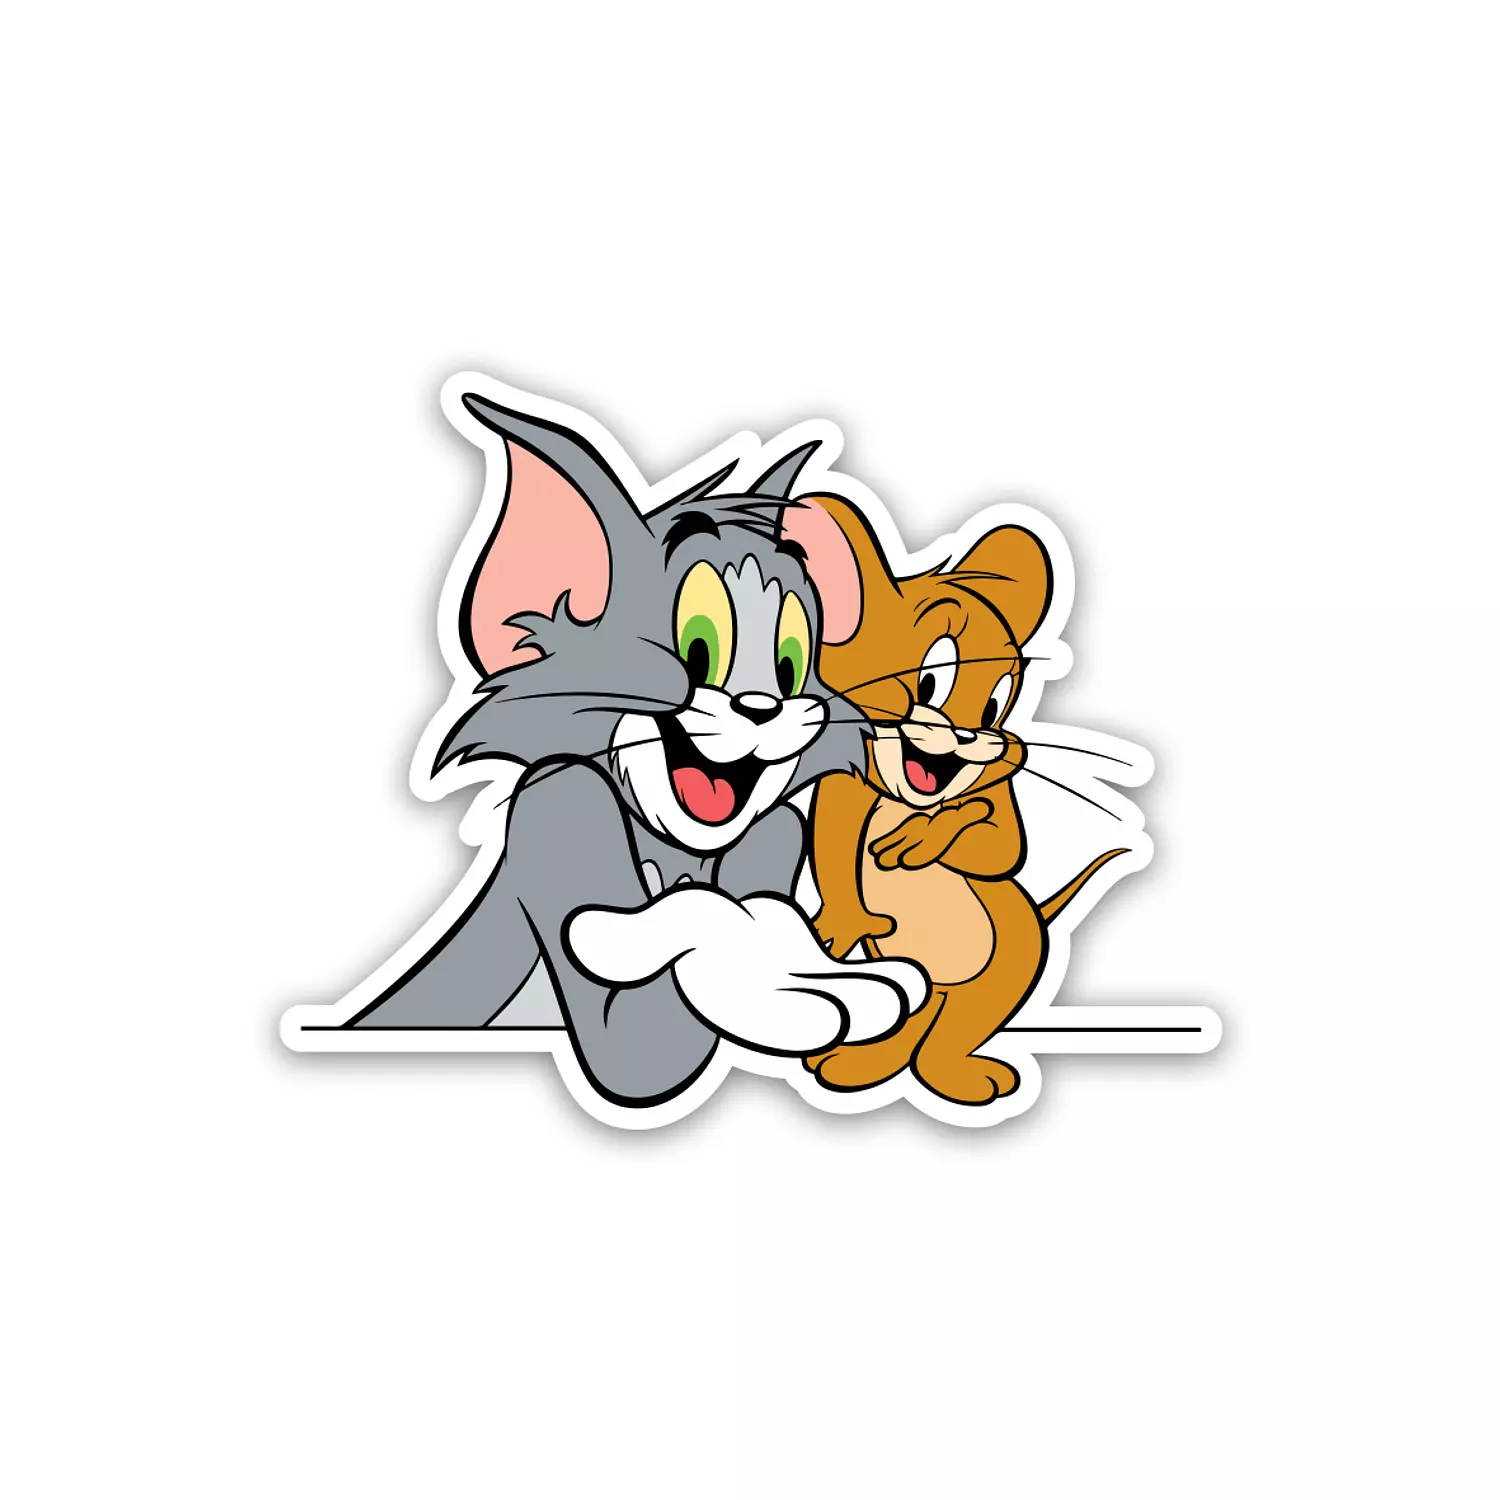 Tom and Jerry - Tom & Jerry - Cartoon  hover image